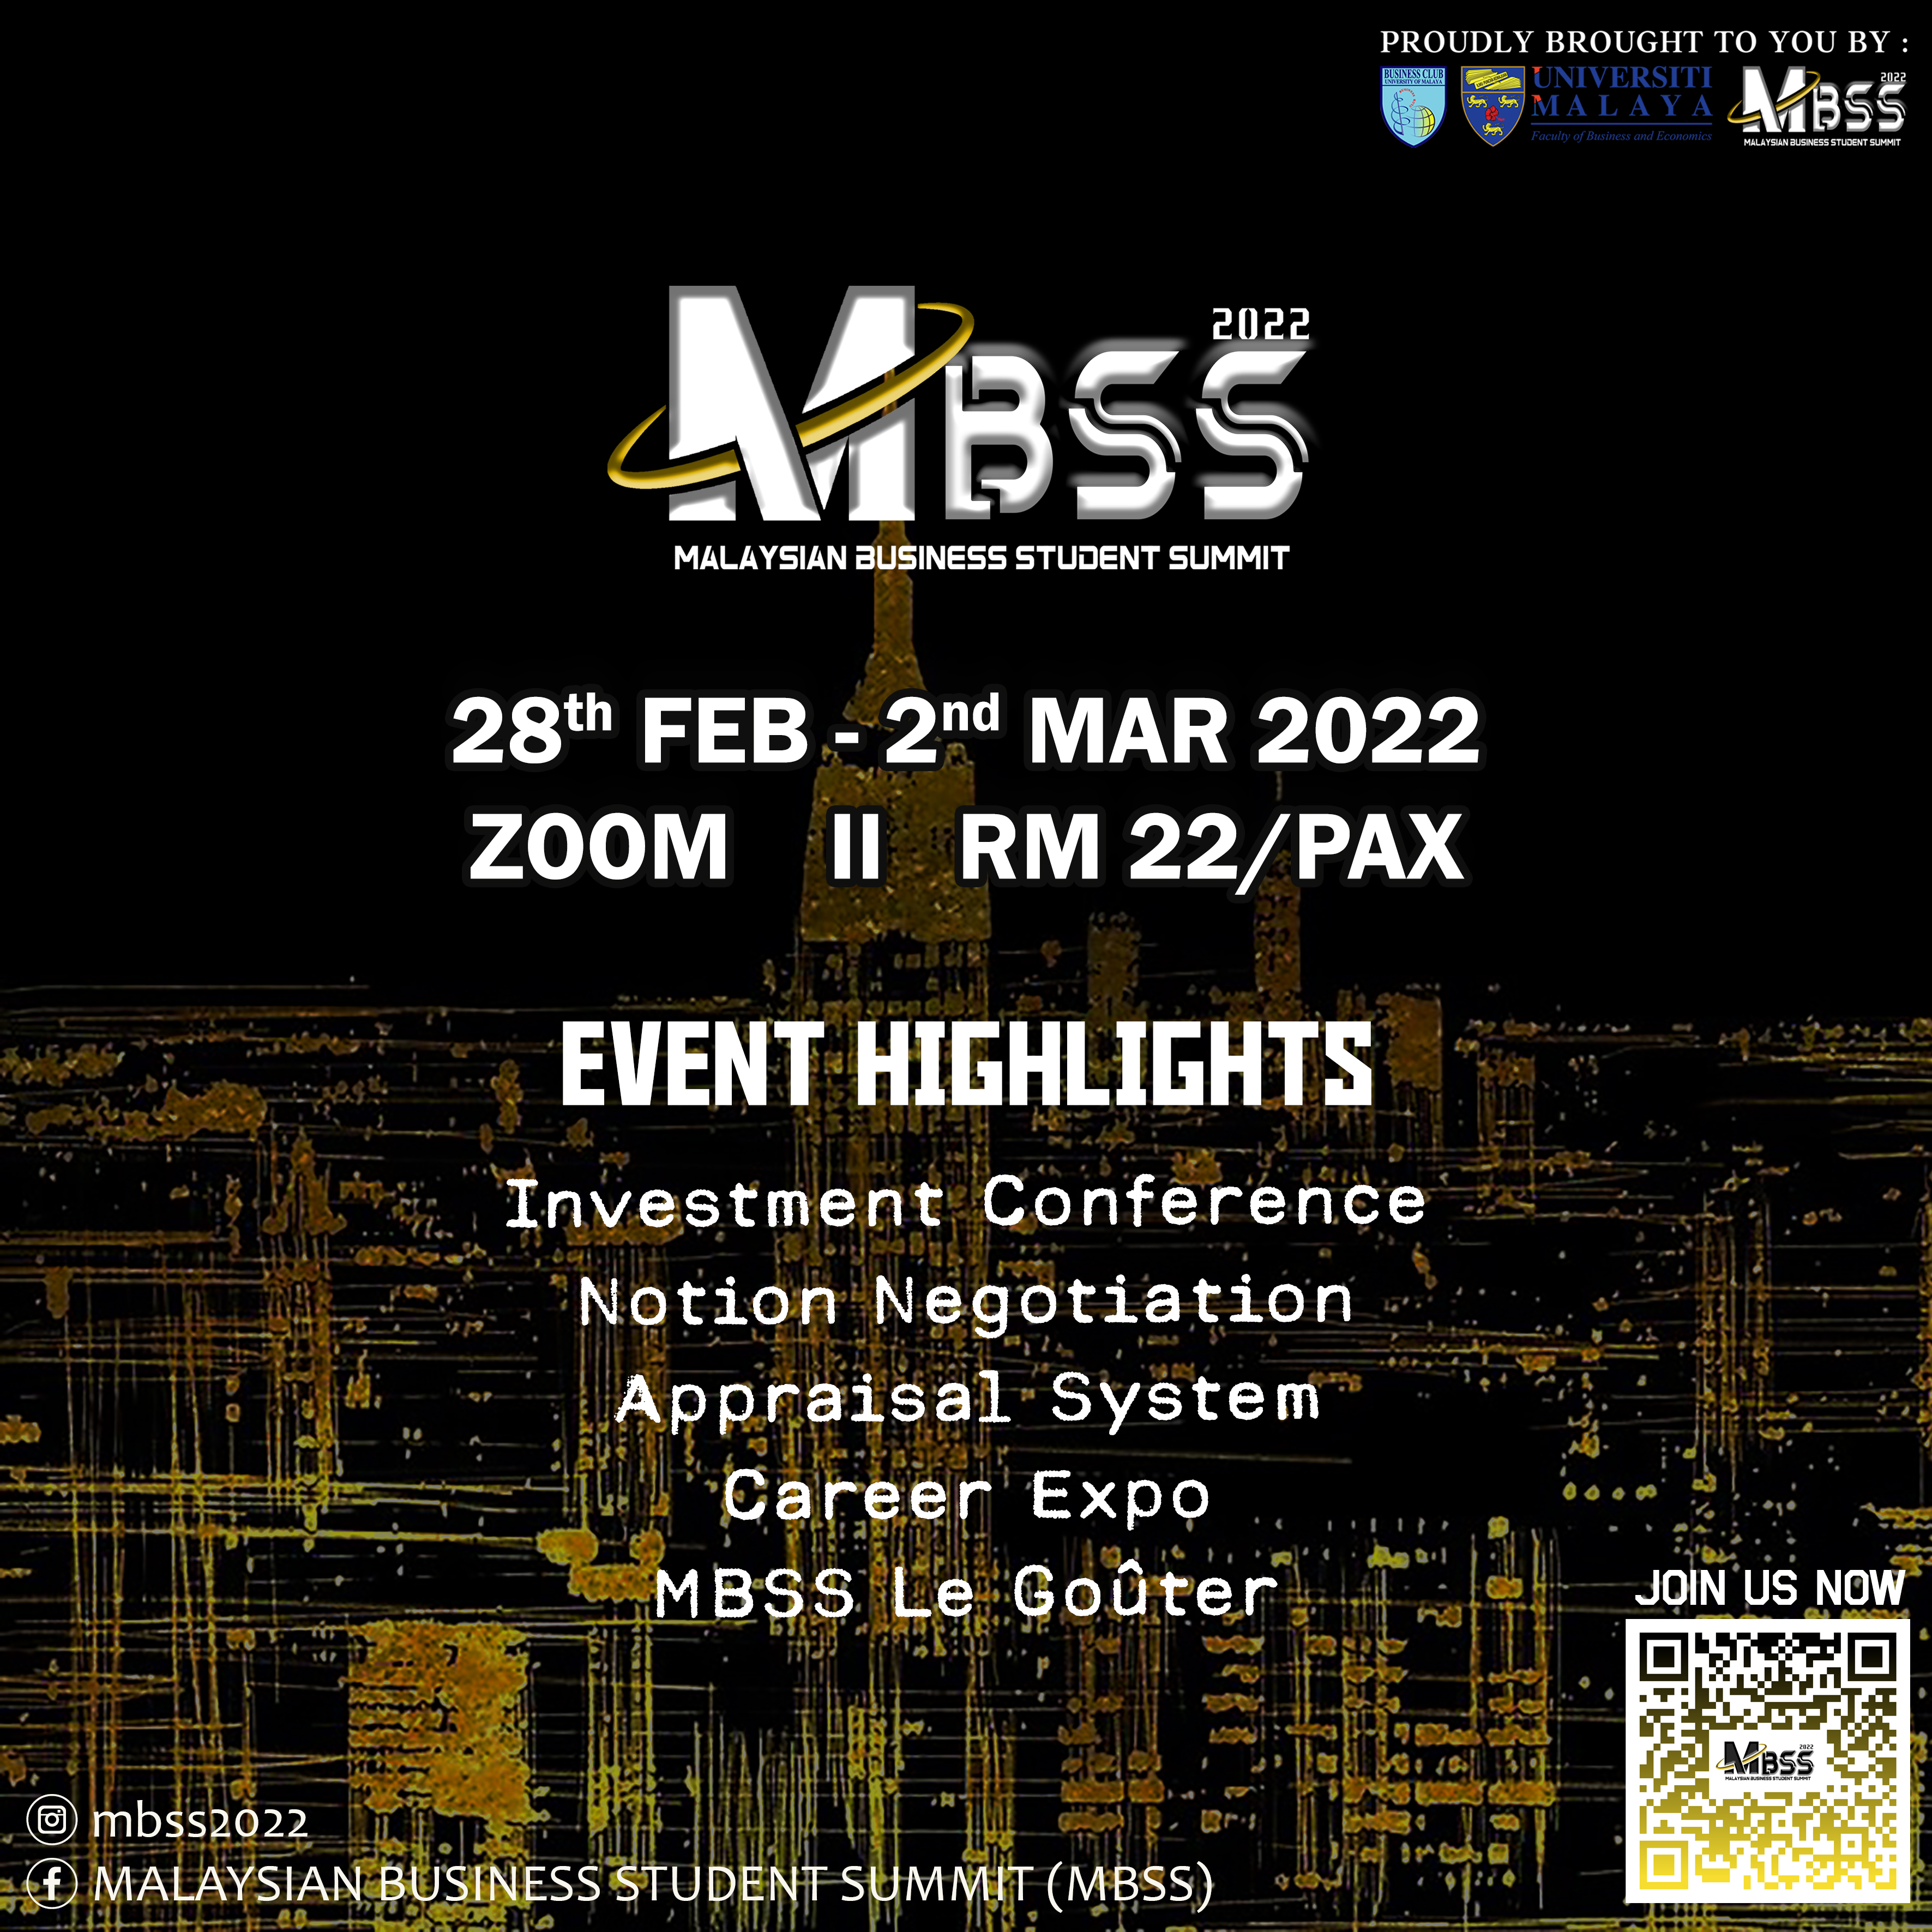 University of Malaya Business Club holds an annual prestigious event which is the Malaysian Business Student Summit (MBSS) 2022. The registration starts on 20th December 2021. 